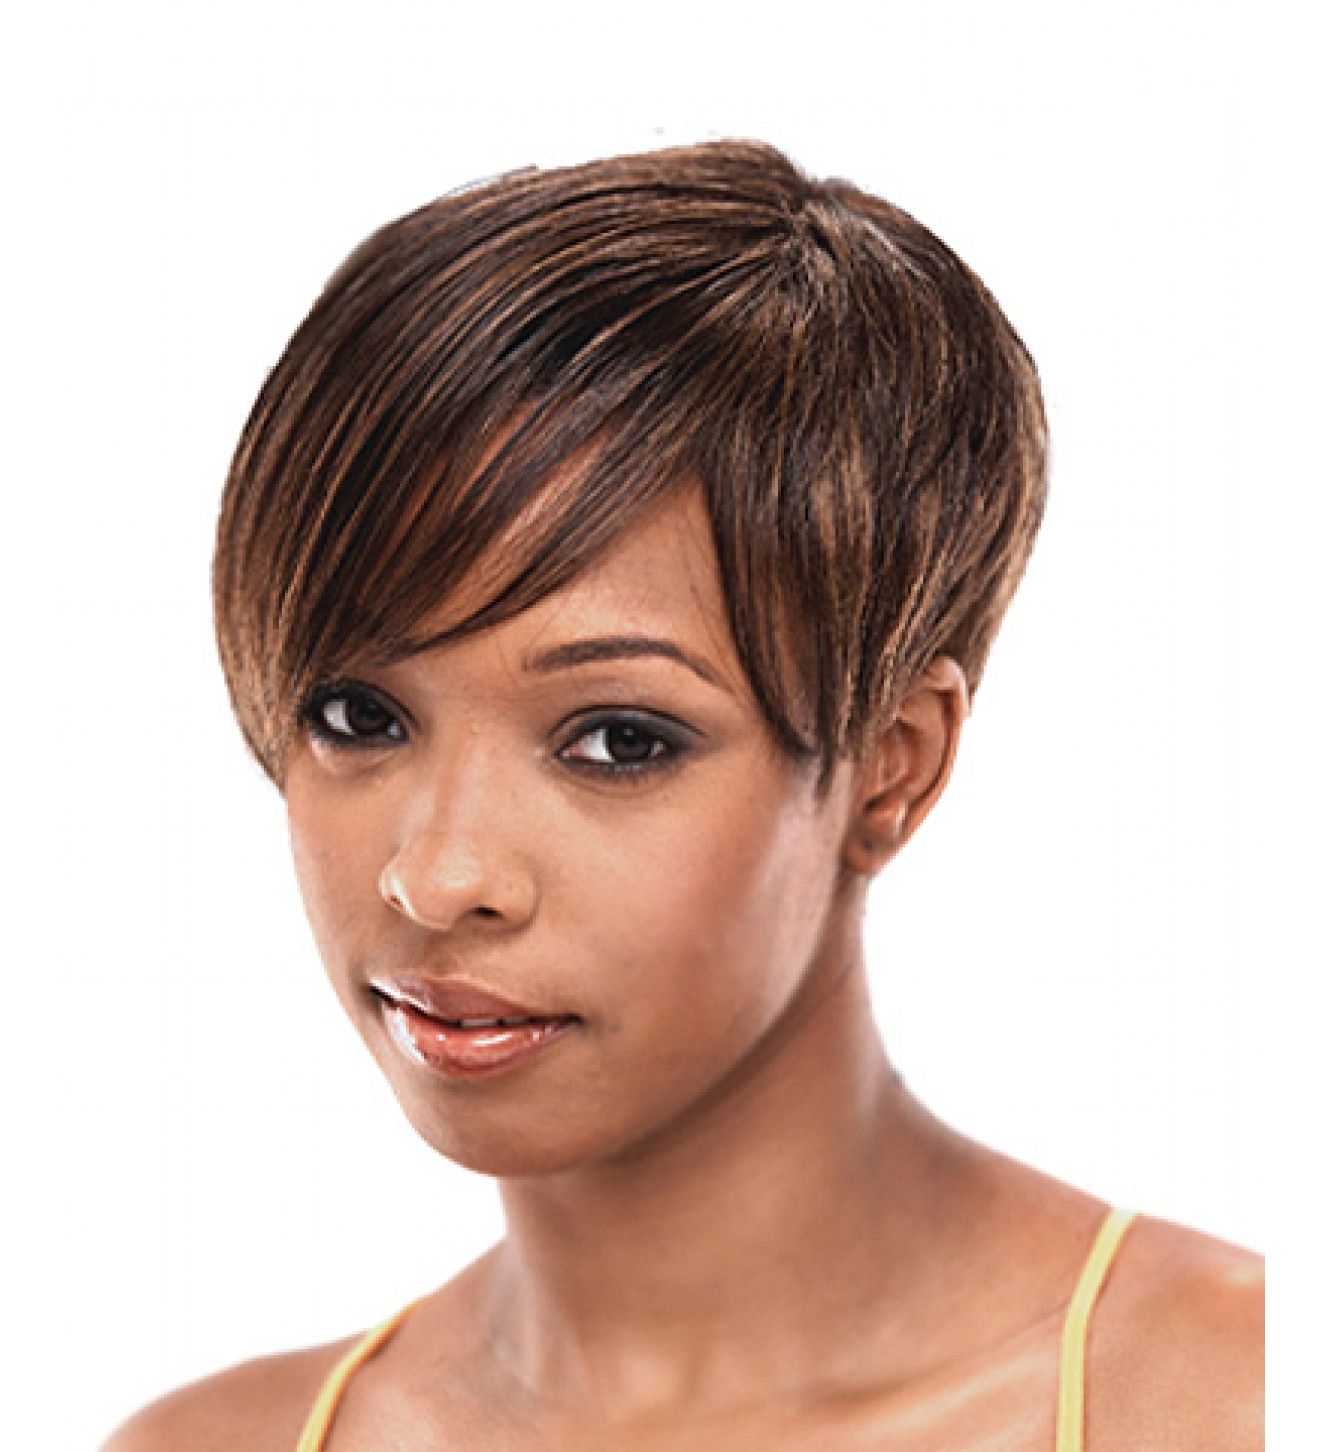 Short Weave Hairstyles For Round Faces | All Hairstyles Throughout Short Weaves For Oval Faces (Photo 8 of 25)